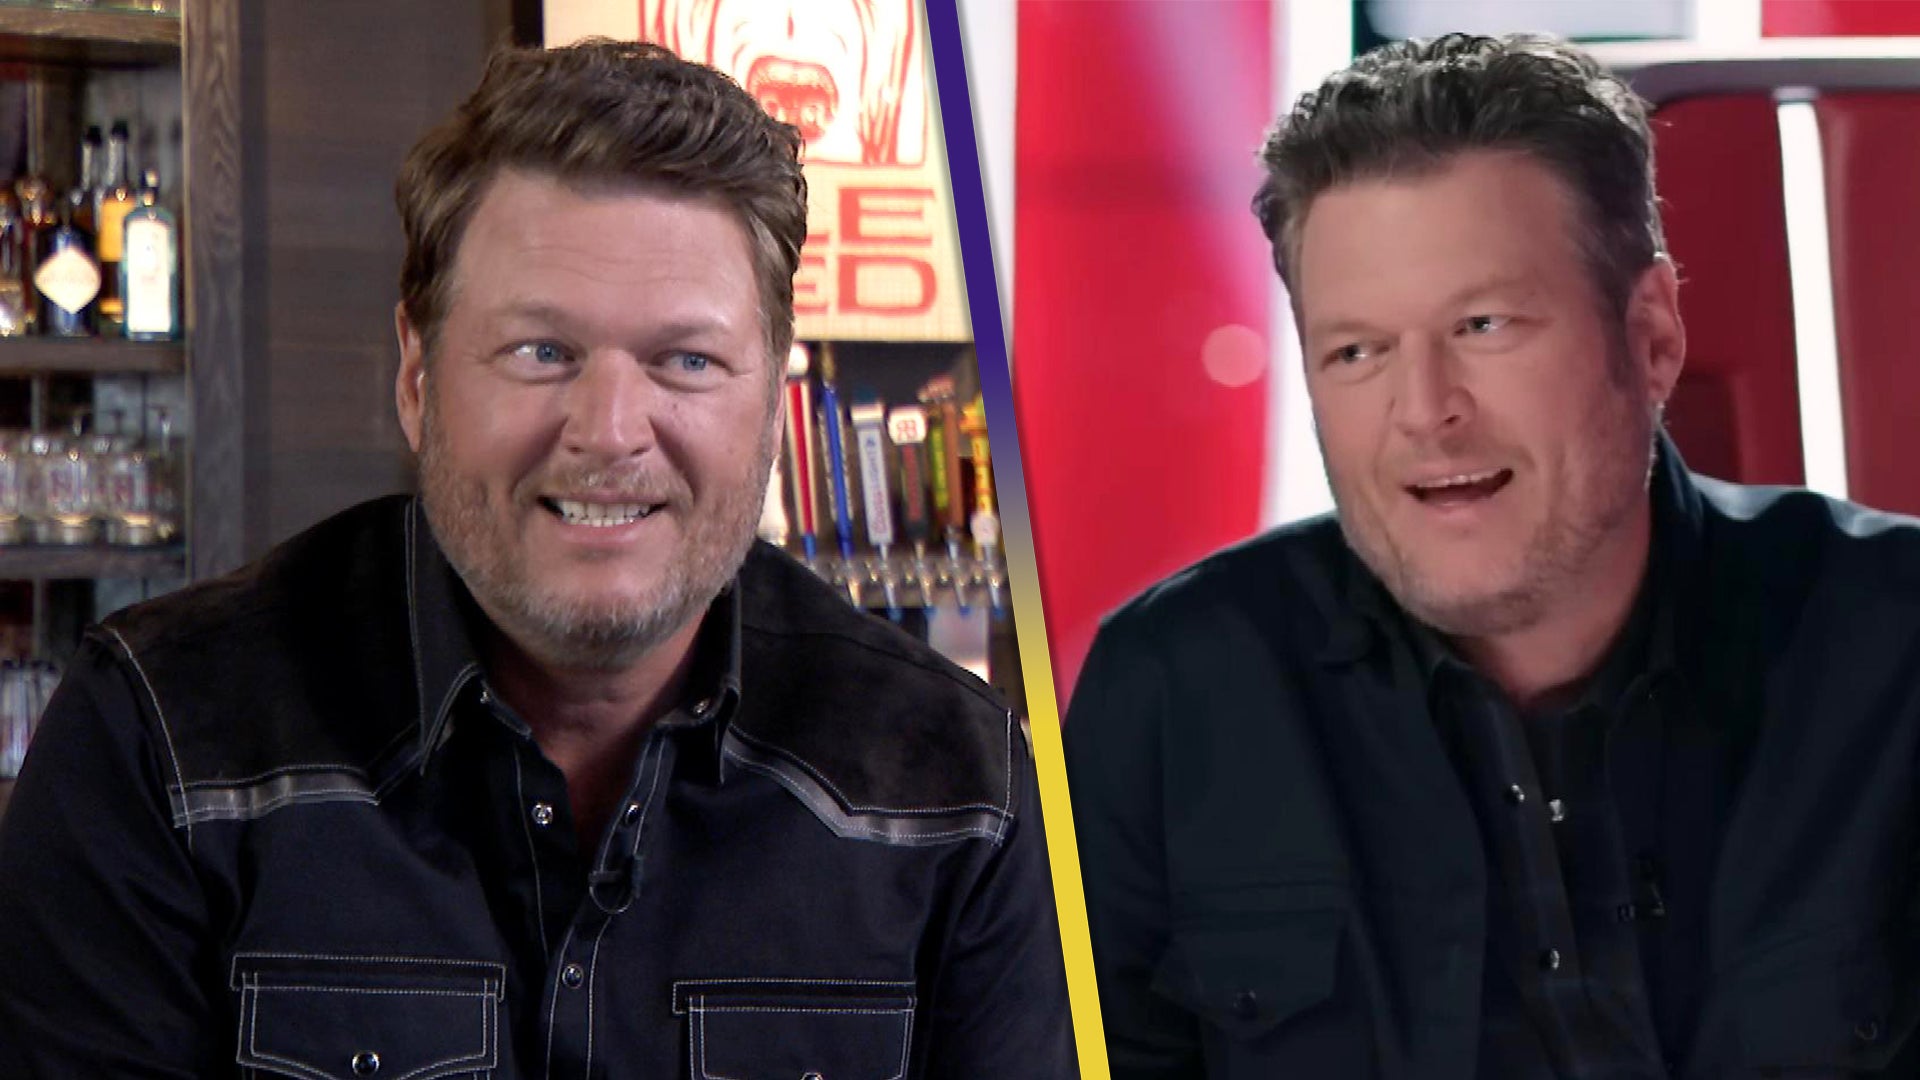 Blake Shelton on If He'll Ever Return to 'The Voice' and How He Feels Since His Exit (Exclusive)